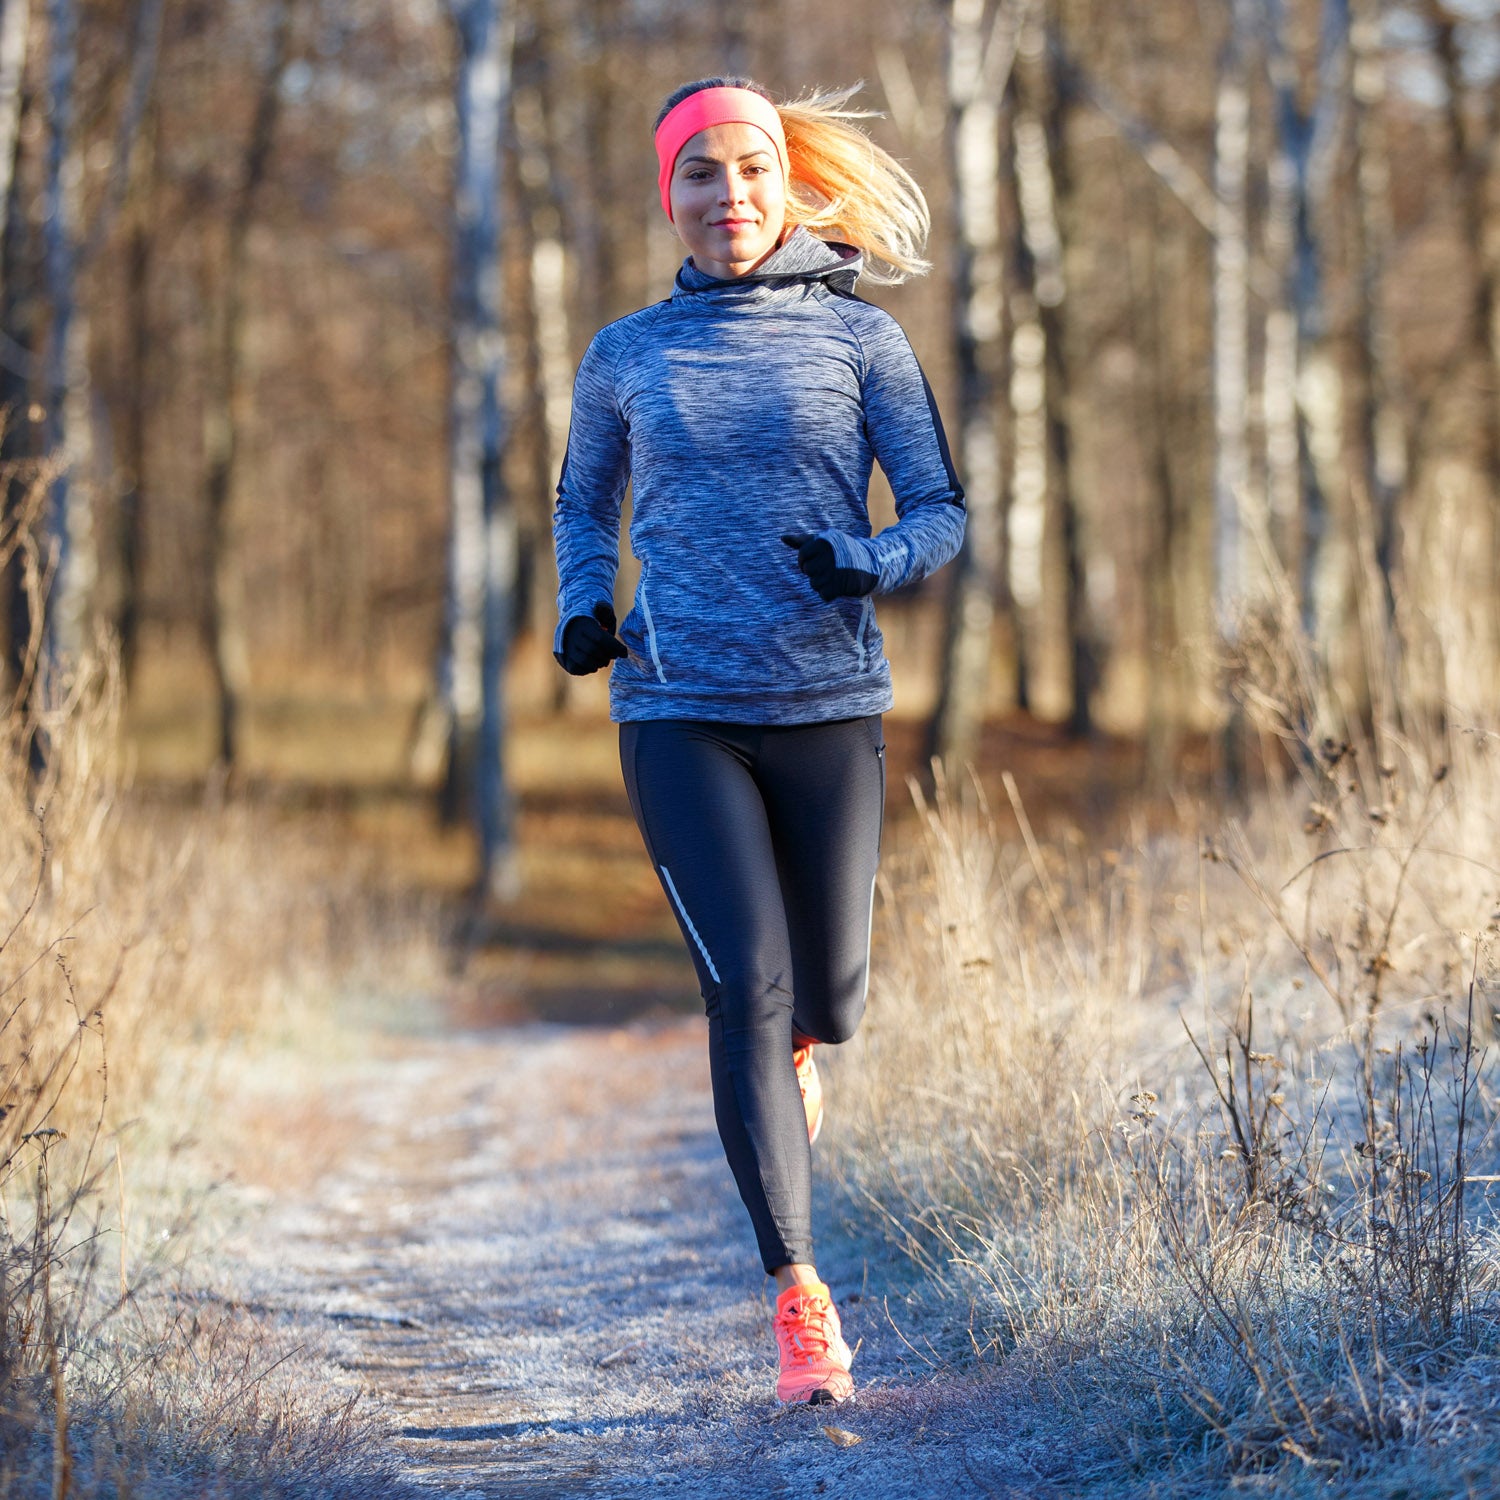 5 Types Of Winter Gear To Help You Train In The Cold – Built for Athletes™